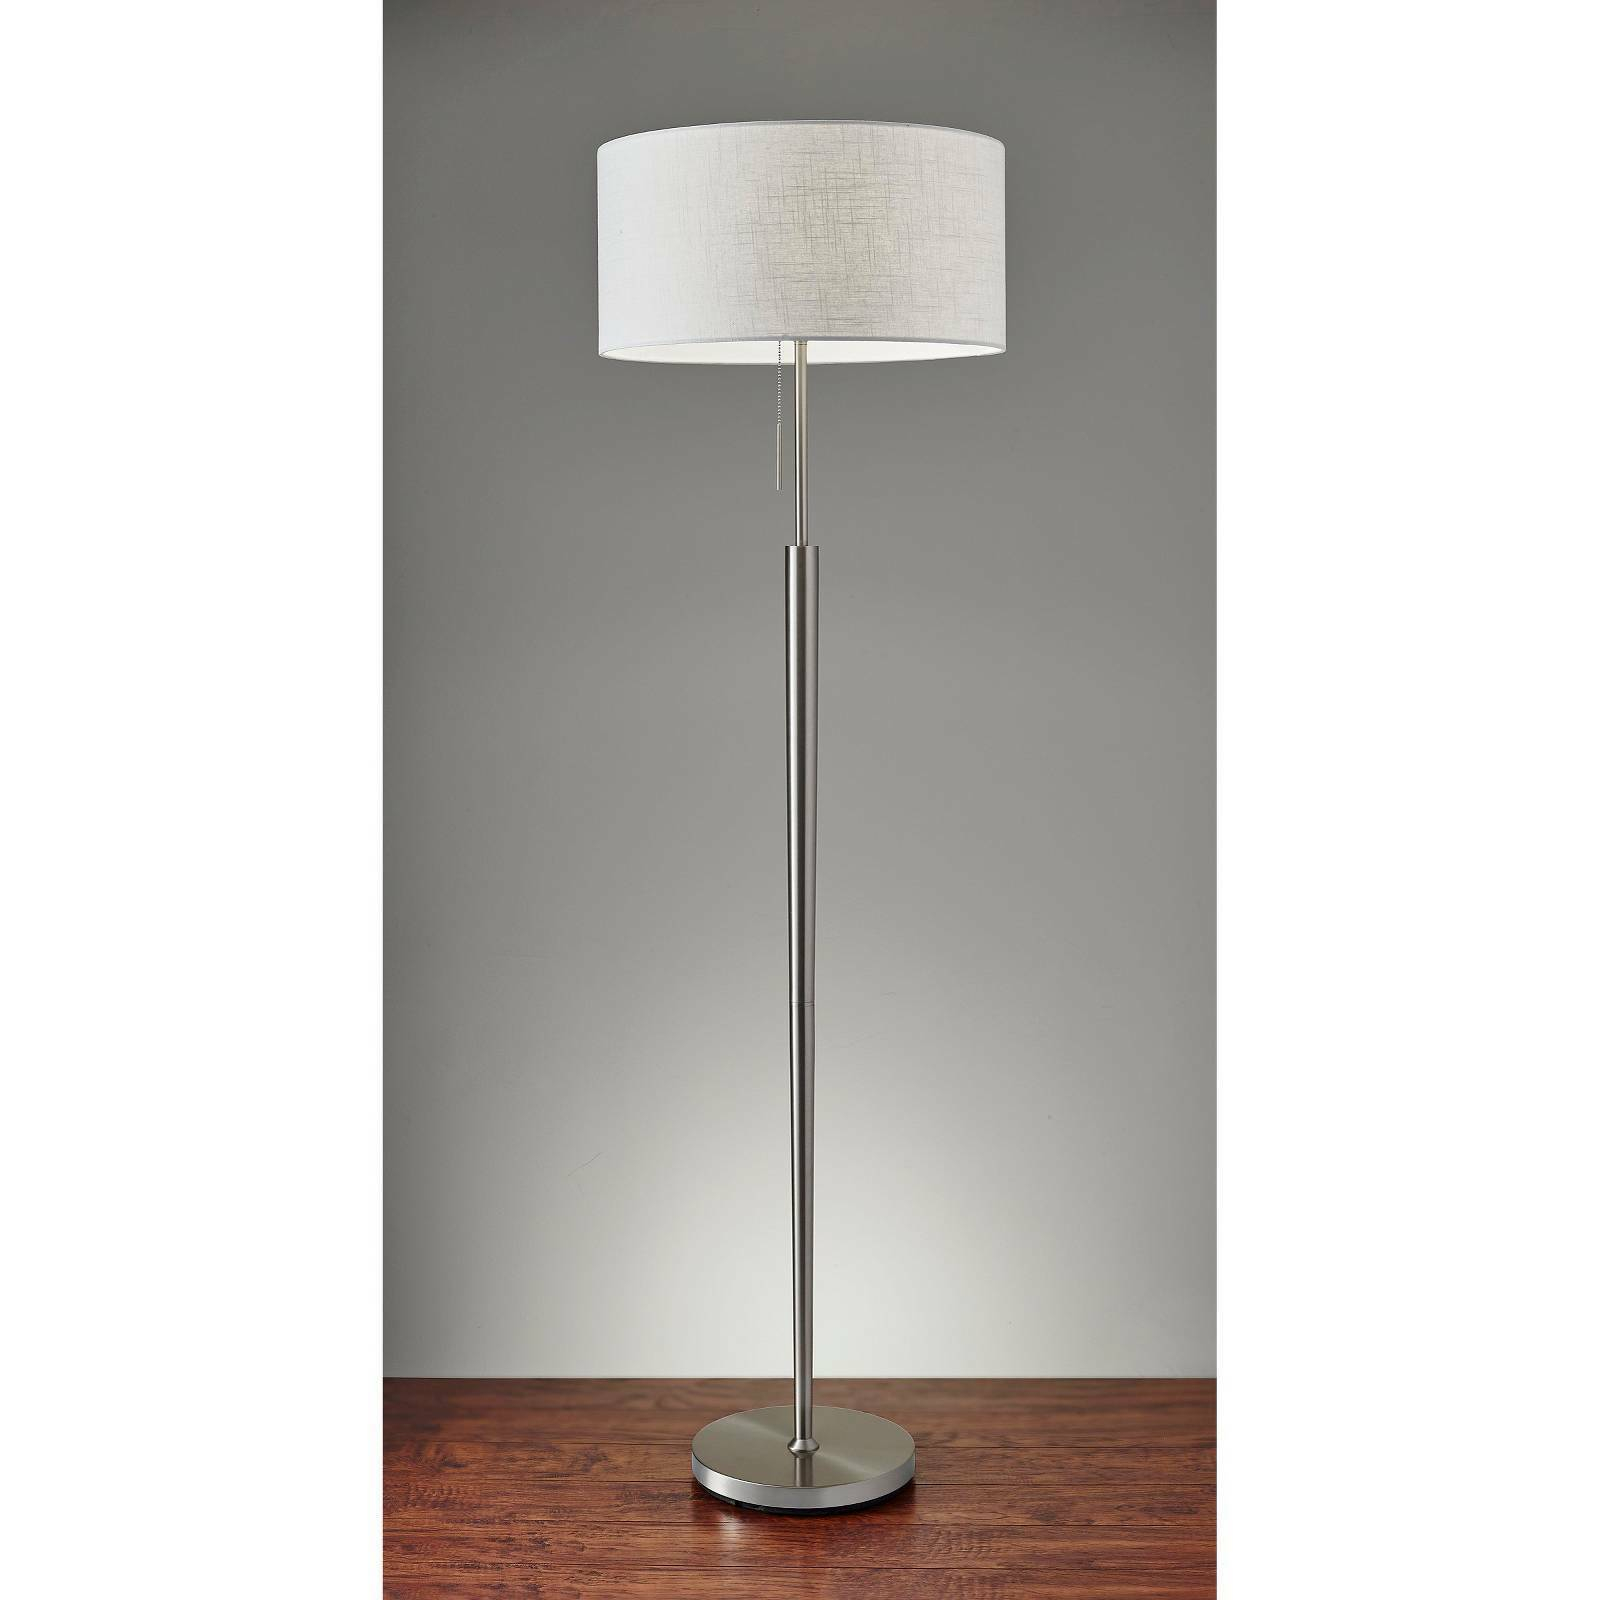 Adesso Hayworth Brushed Steel One Light Floor Lamp 3457 22 pertaining to measurements 1600 X 1600